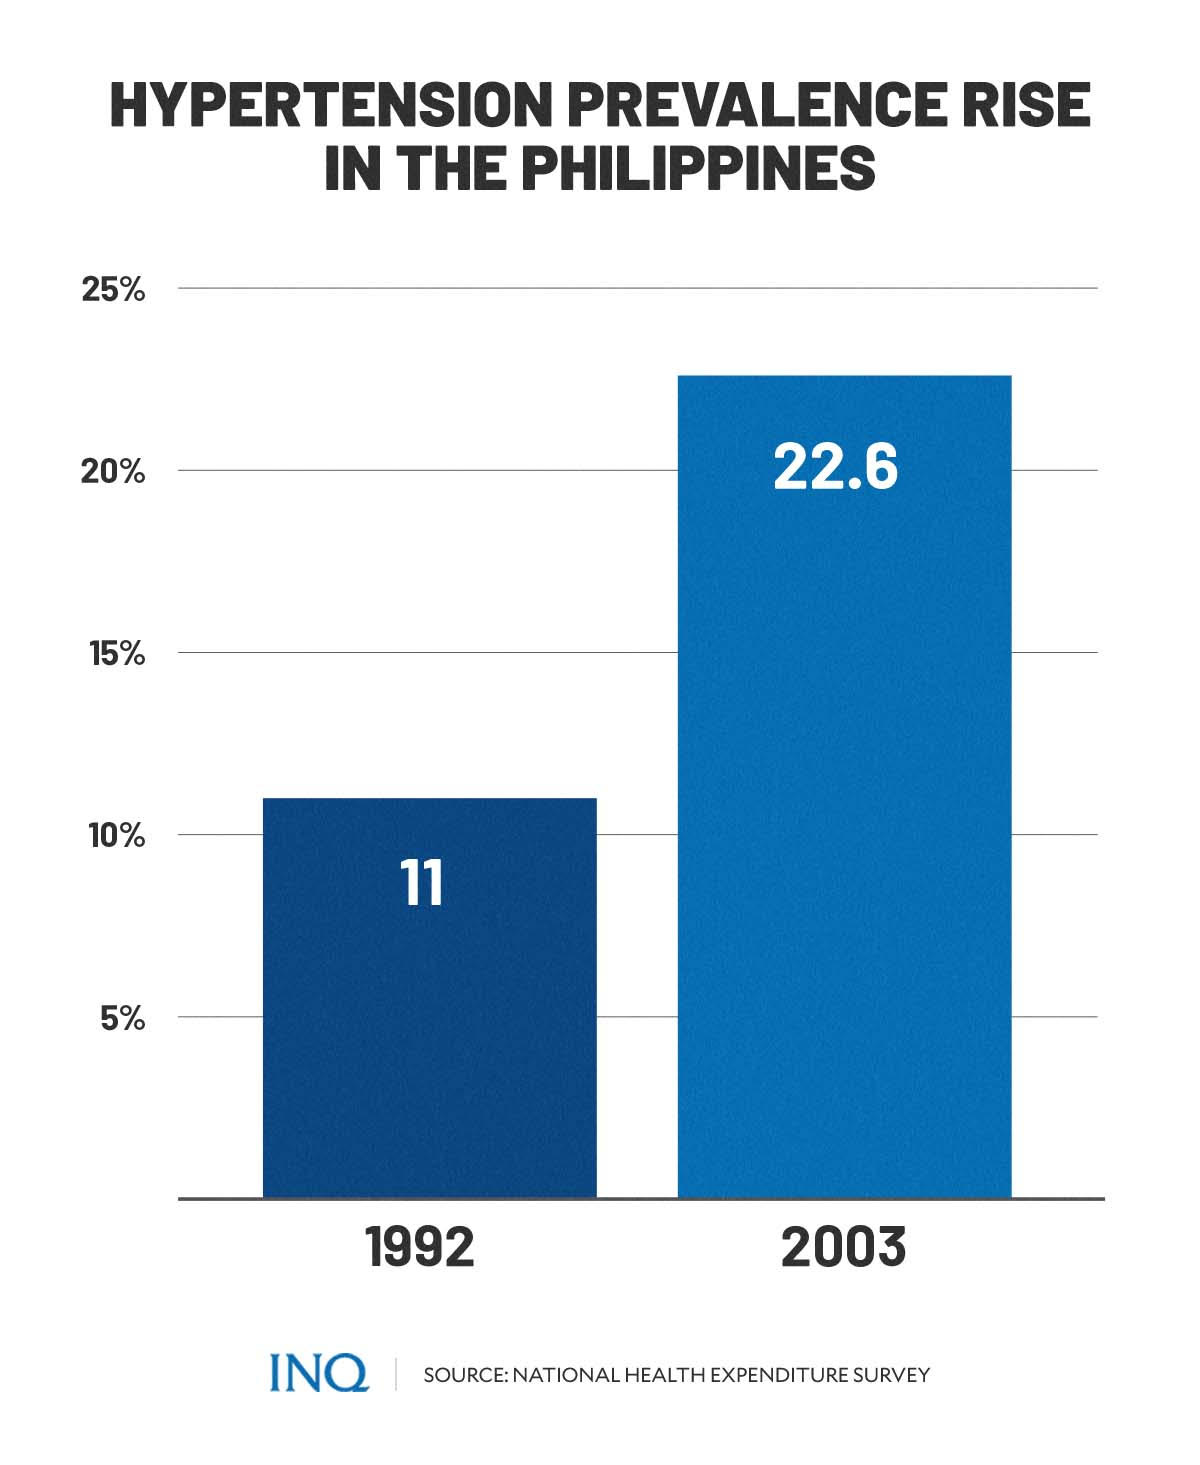 Hypertension pervalence rise in the Philippines